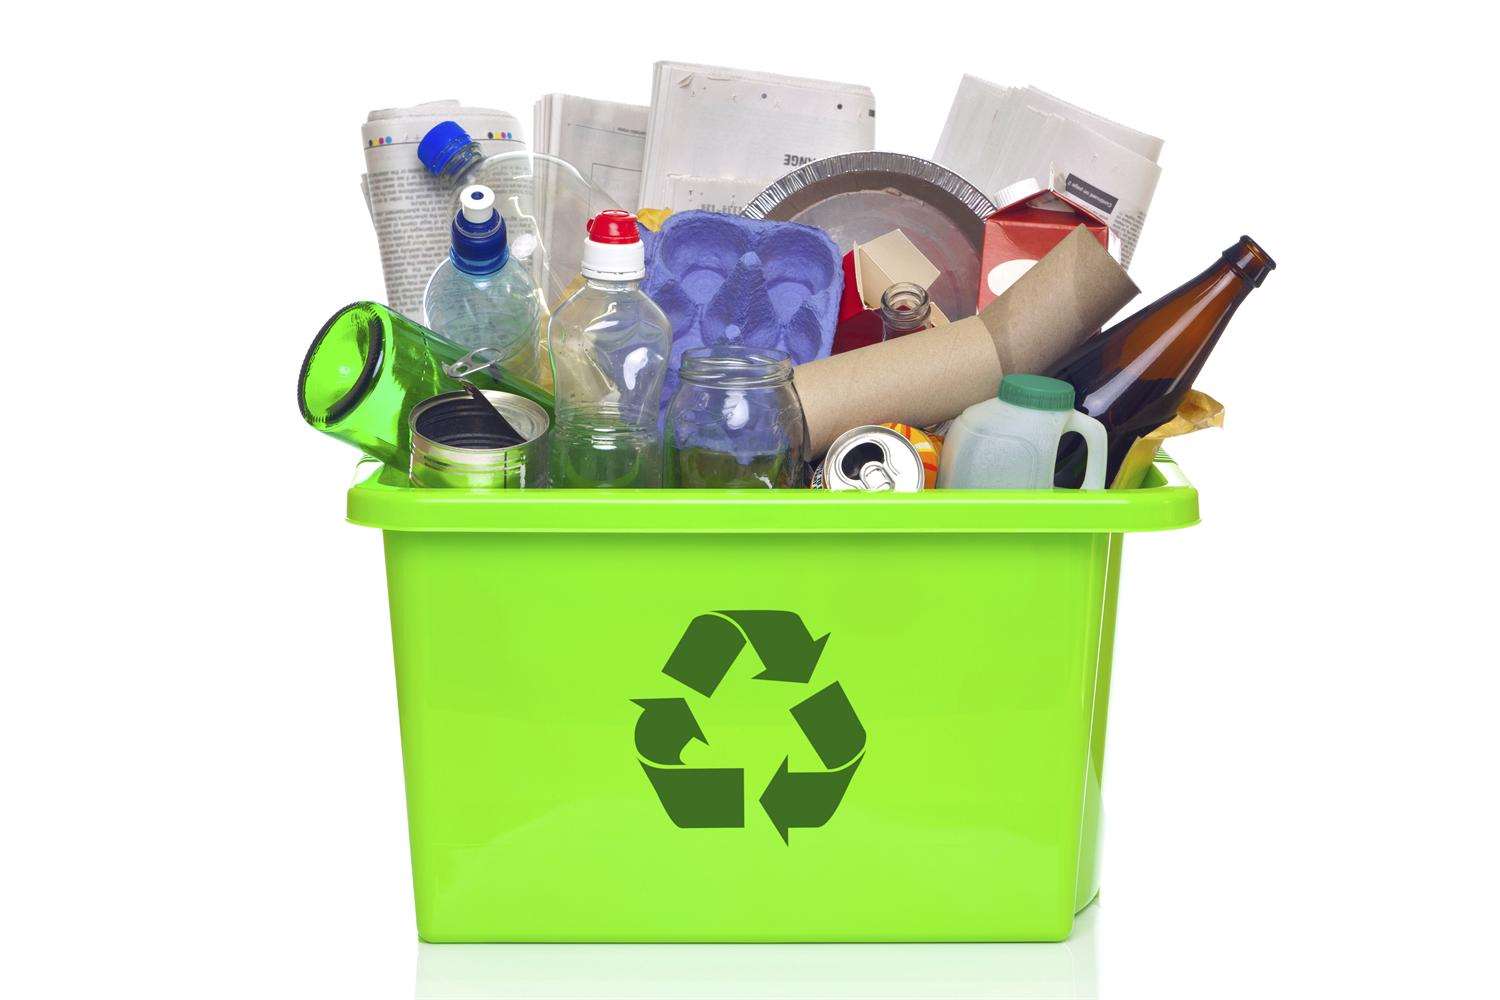 Residents can recycle more than ever, according to the council